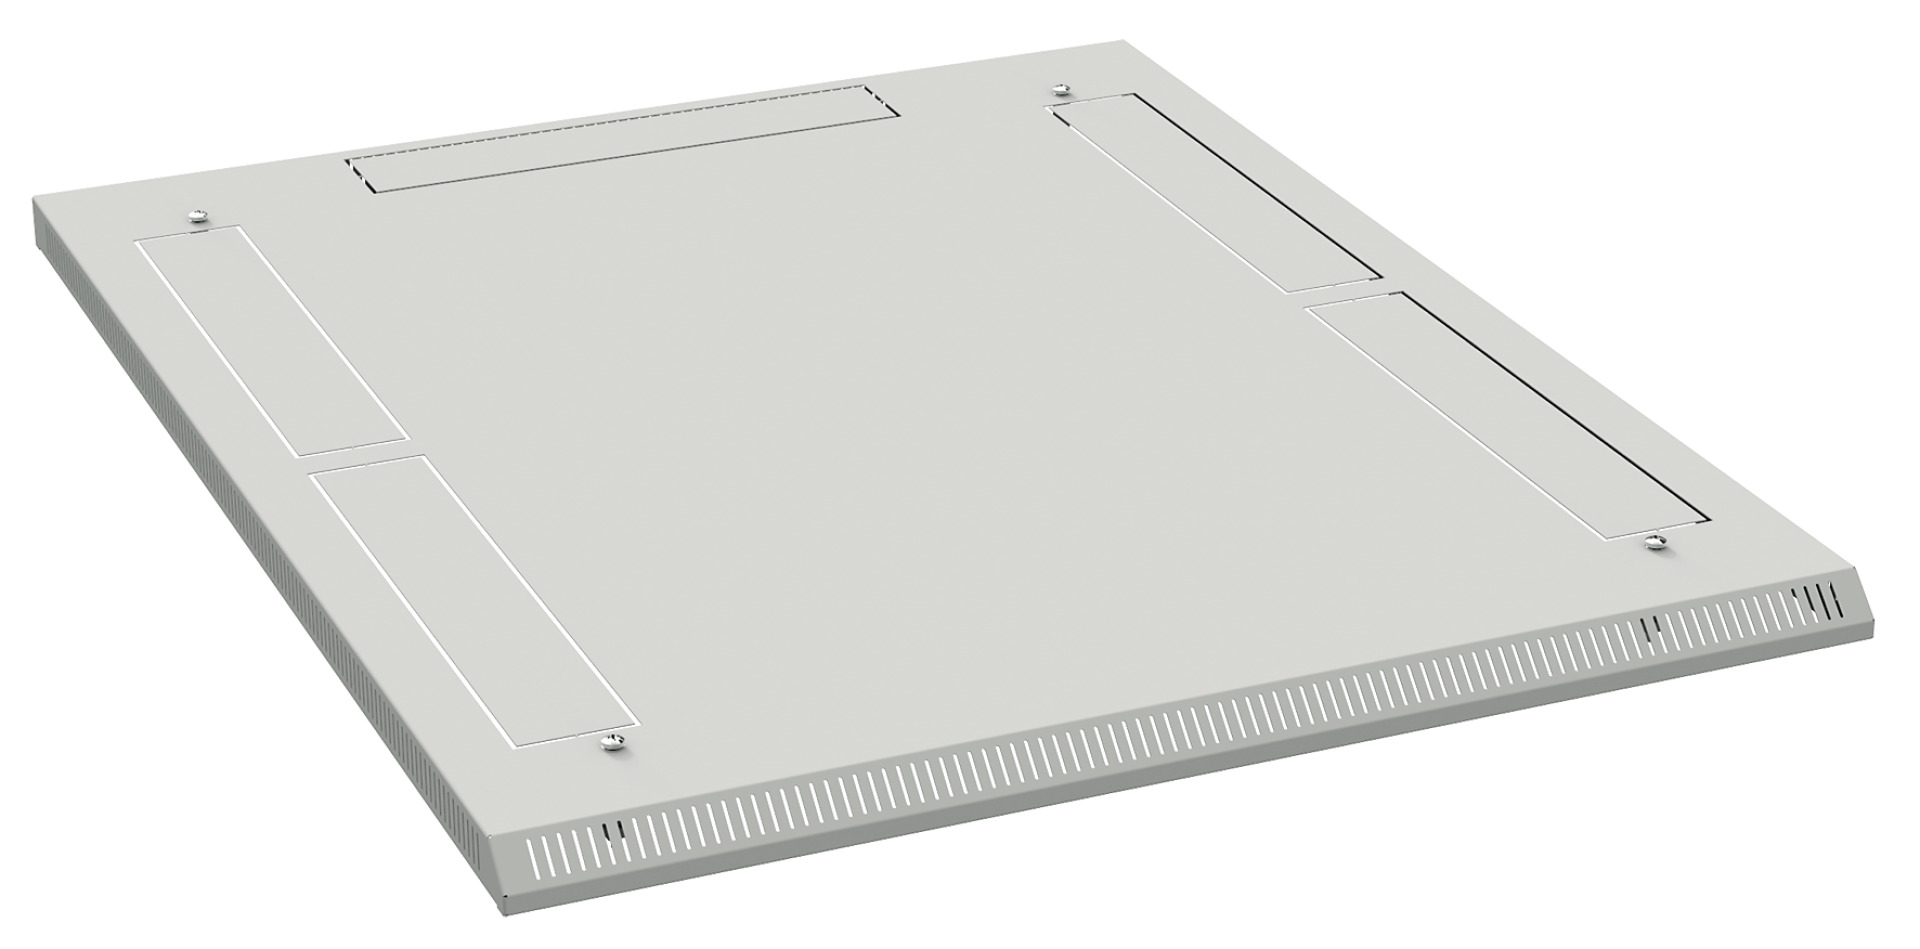 Additional Roof H=40 mm, 600x1000 mm, RAL7035, for Cabinet Series PRO